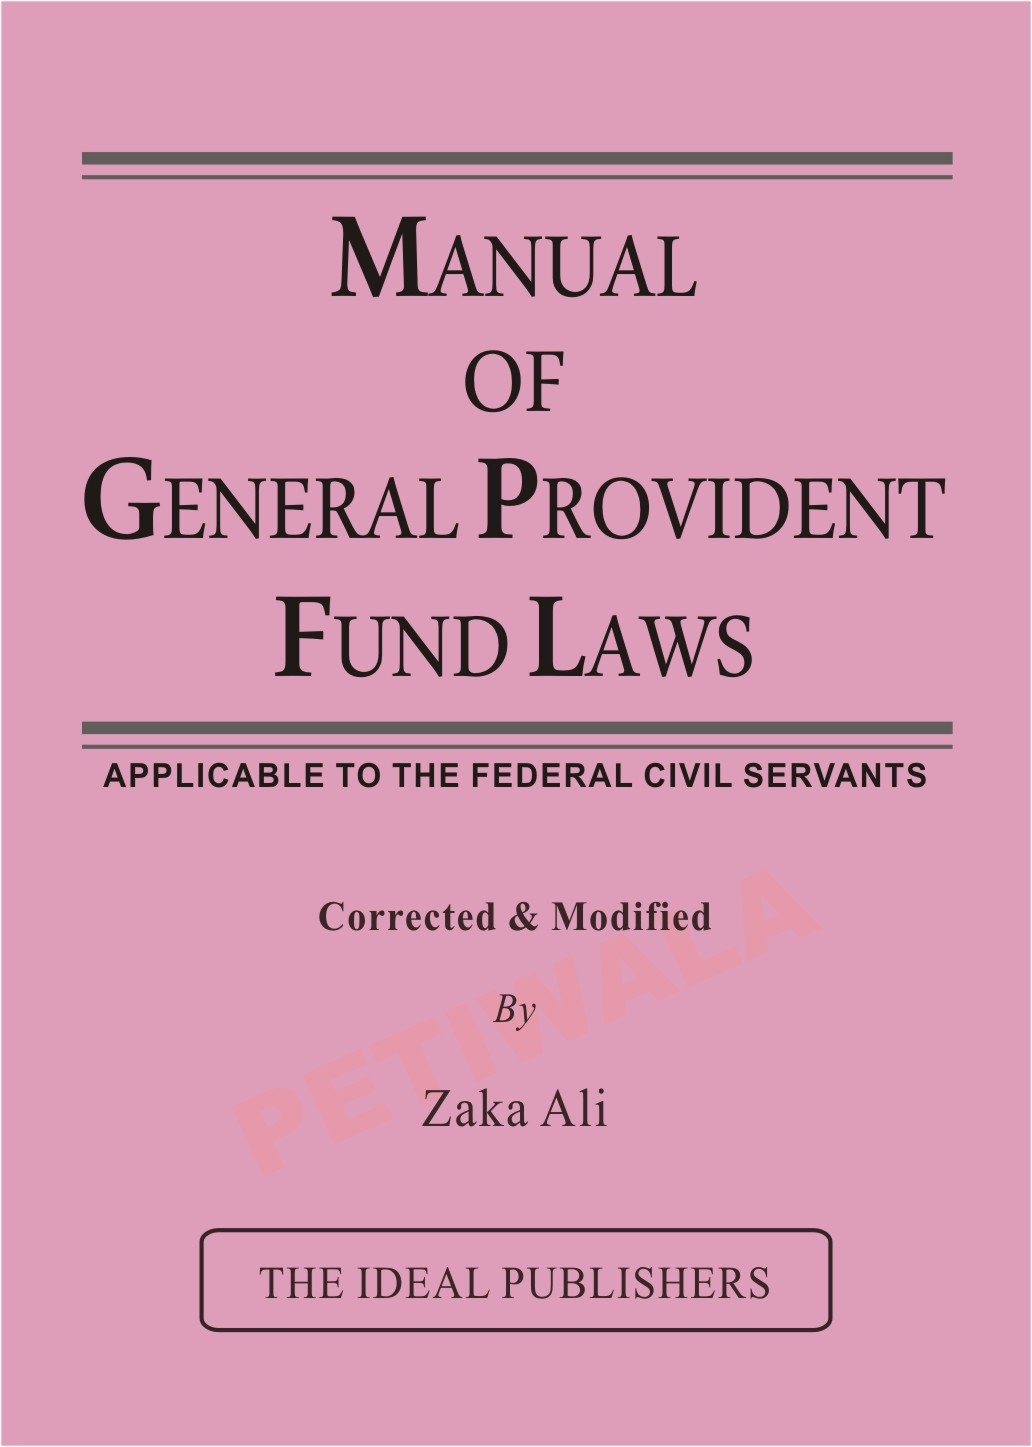 Manual of General Provident Fund Laws